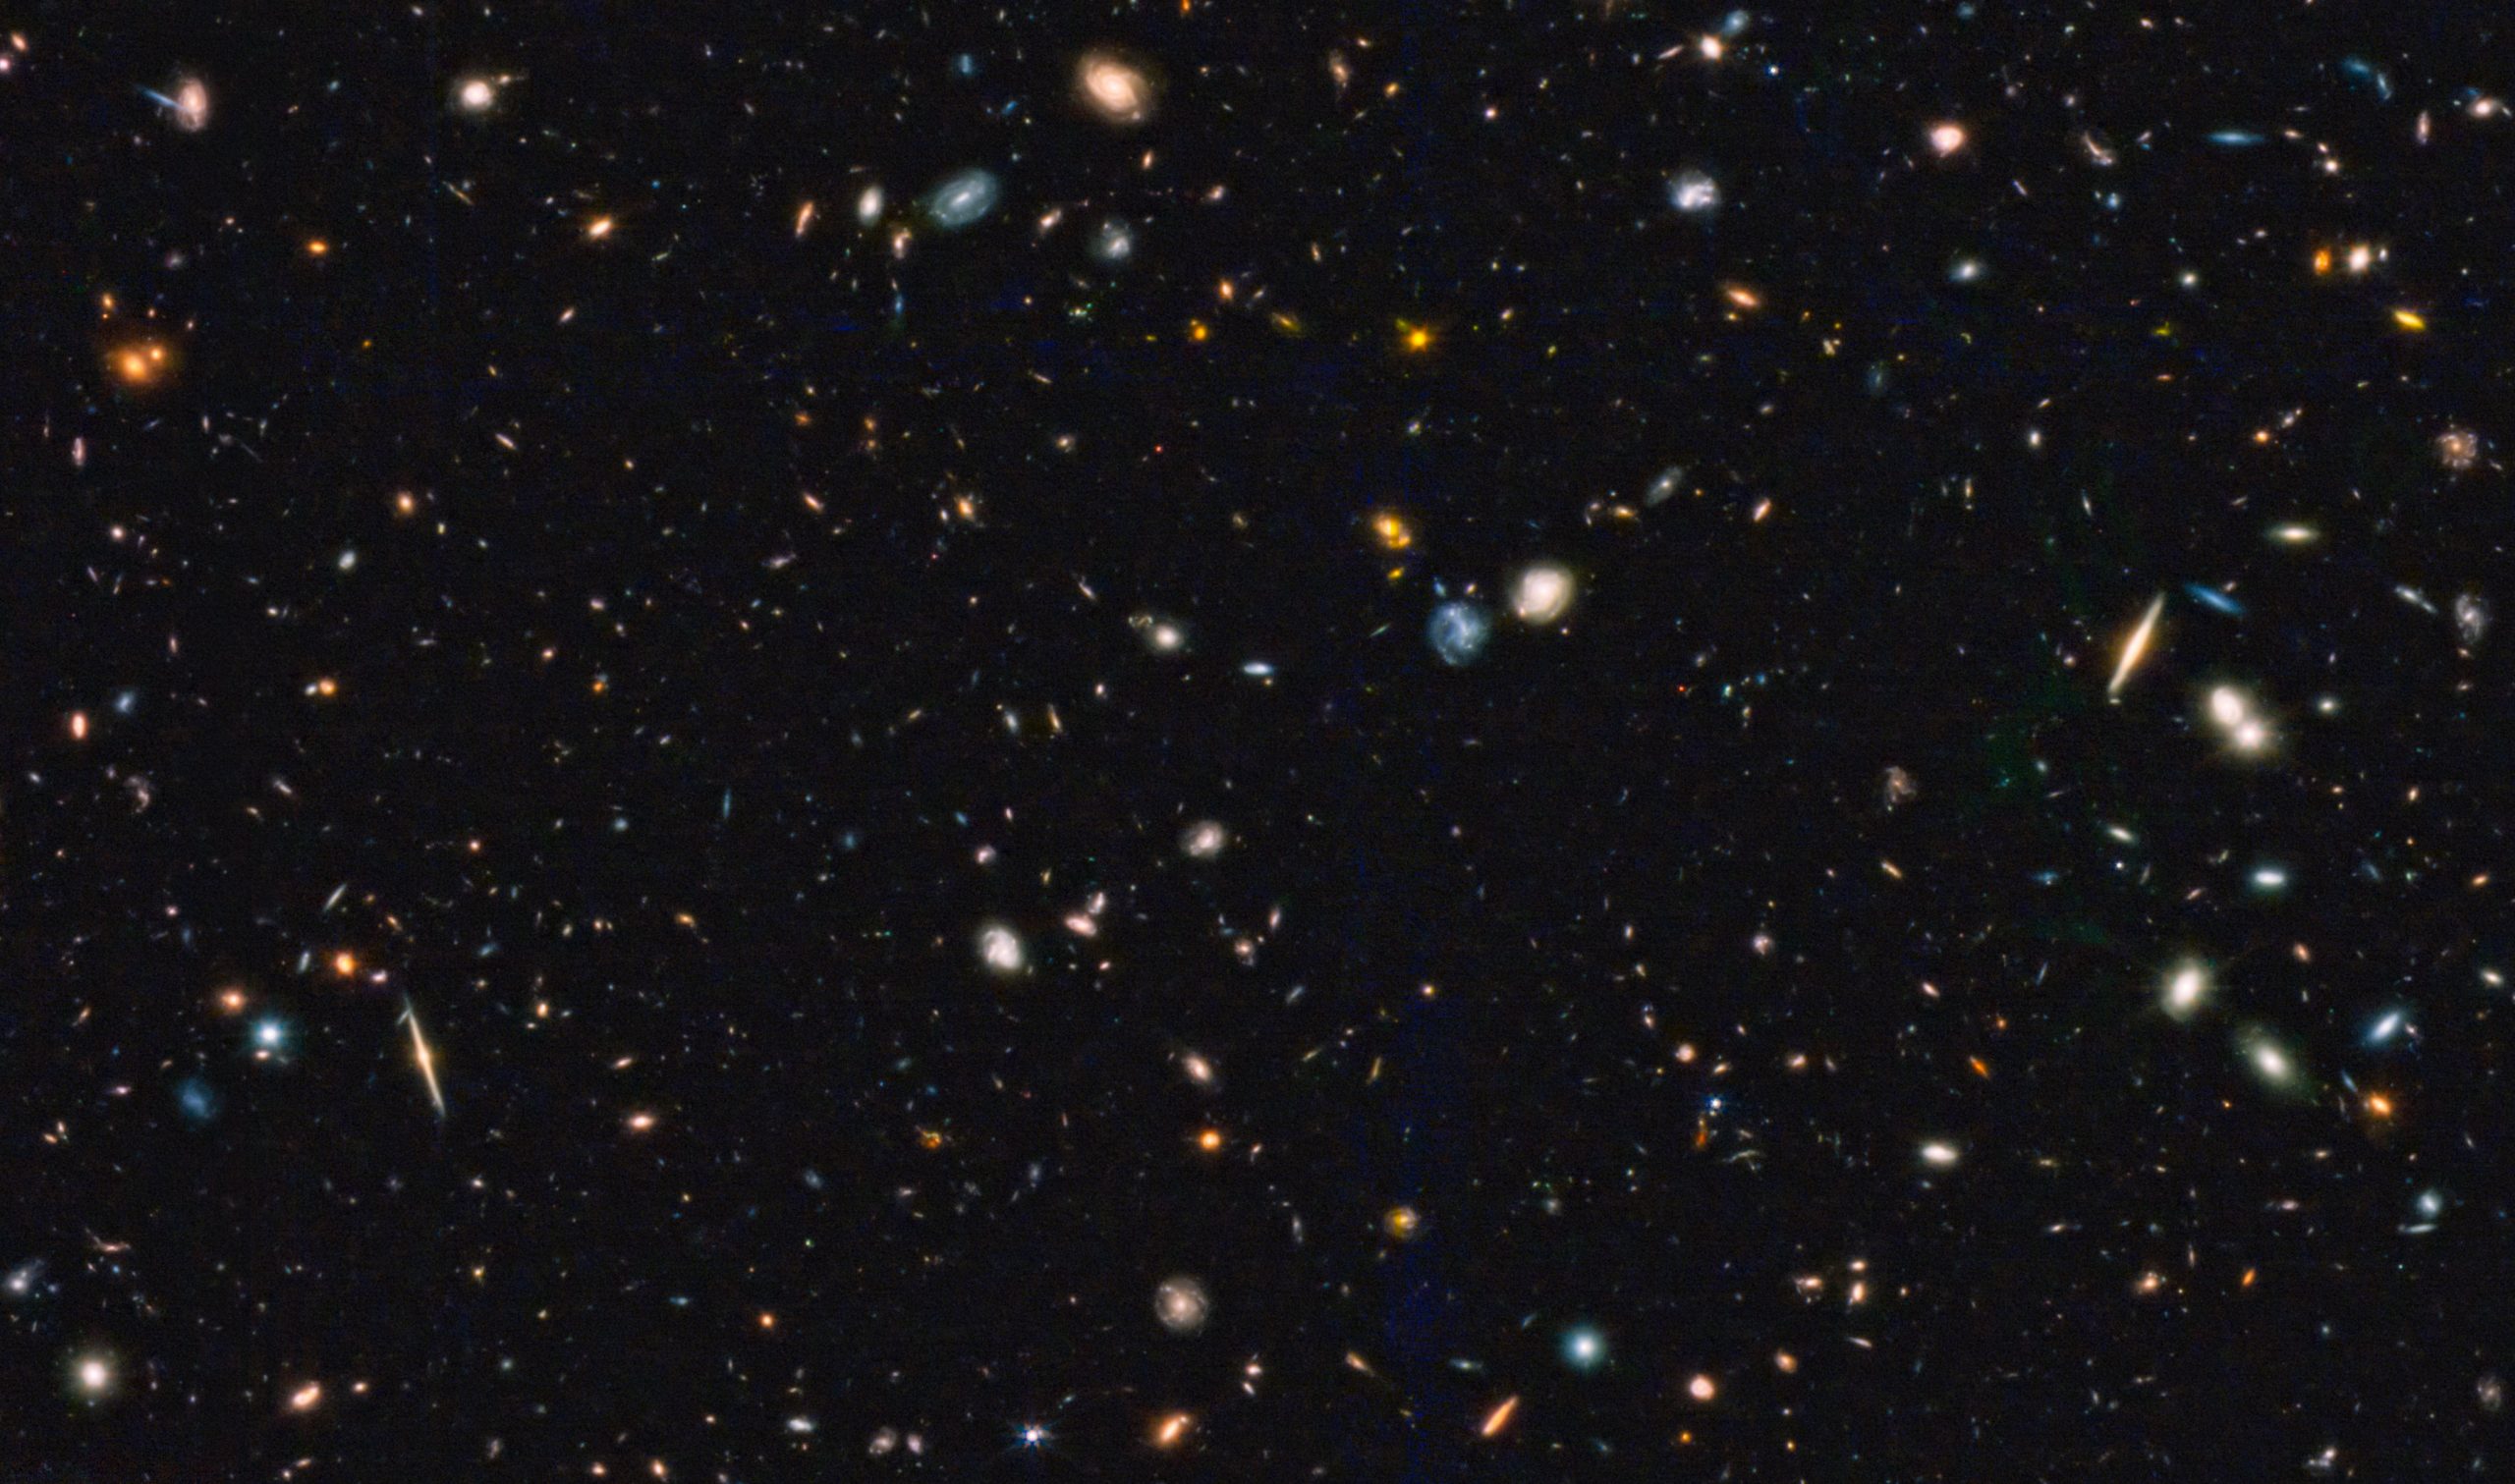 A photograph by the James Webb Space Telescope showing many galaxies. Image Credit: NASA, ESA, CSA, STScI.